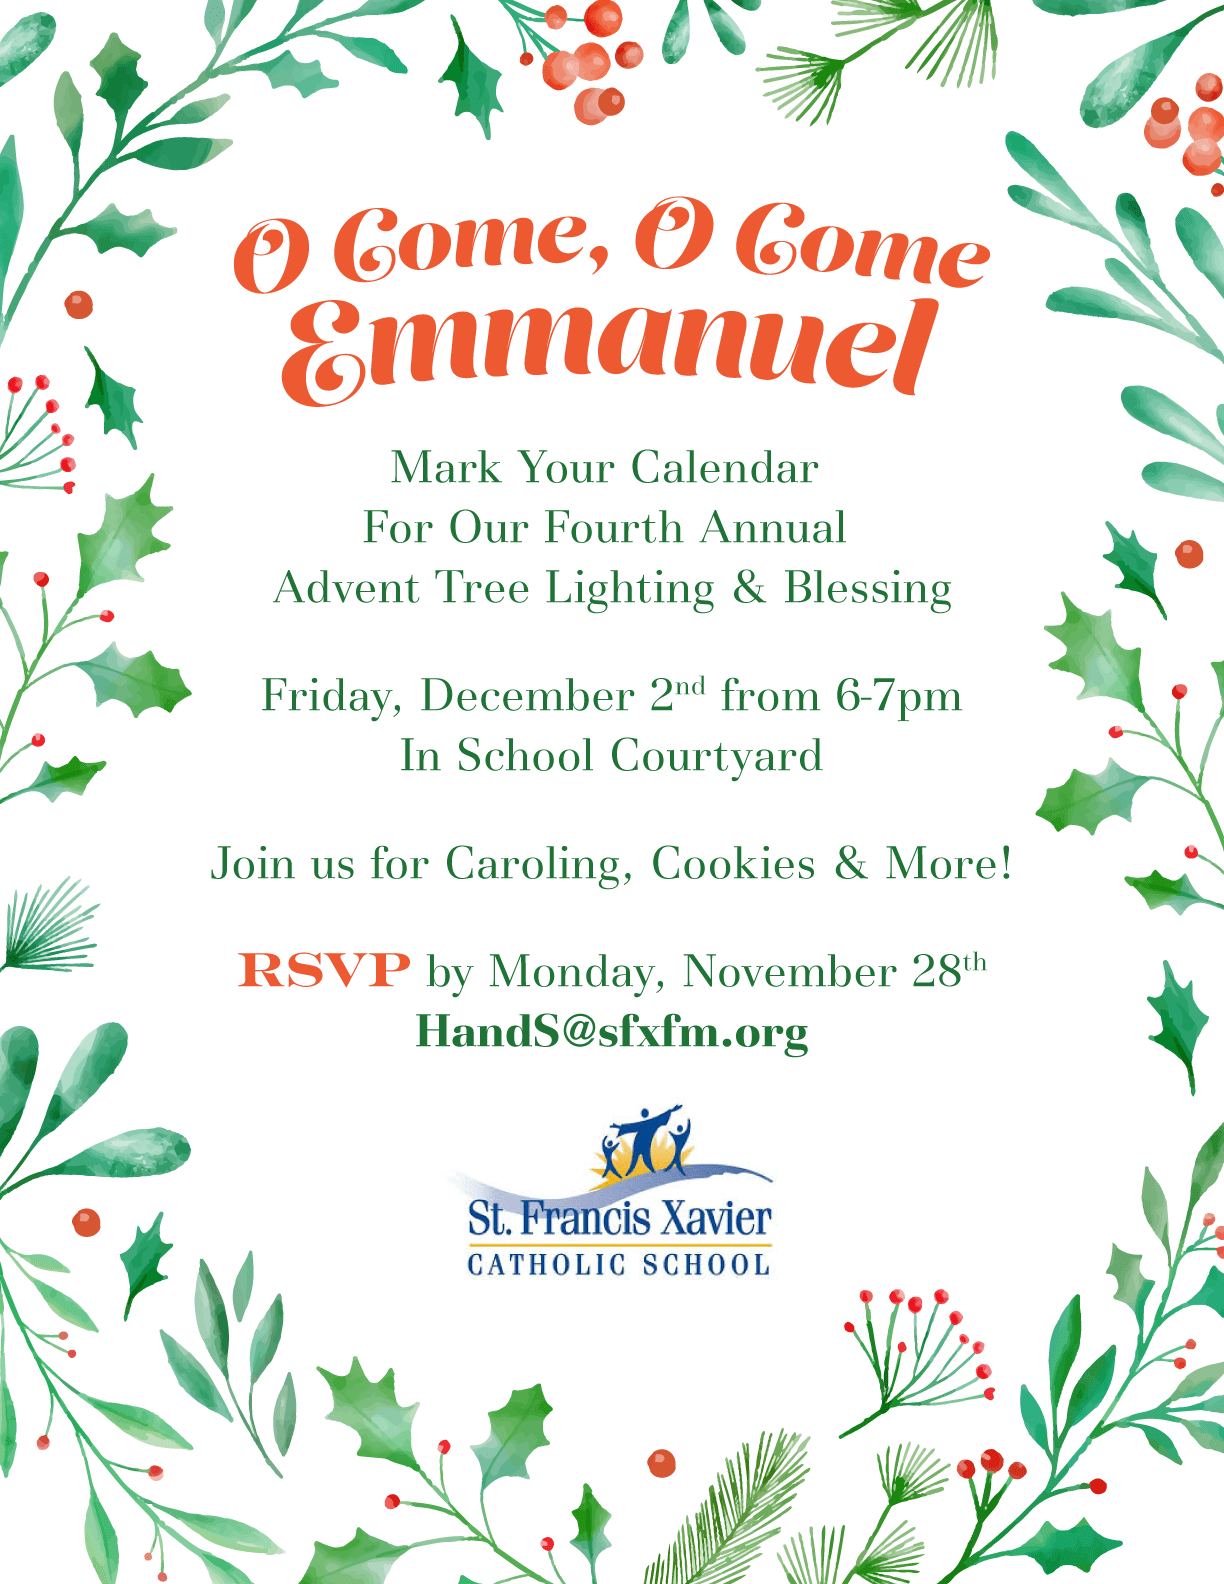 Mark your calendar for our fourth annual Advent Tree Lighting and Blessing. Friday, December 2nd from 6pm to 7pm in School Courtyard. Join us for Caroling, Cookies, and more! RSVP by Monday, November 28th to hands@sfxfm.org